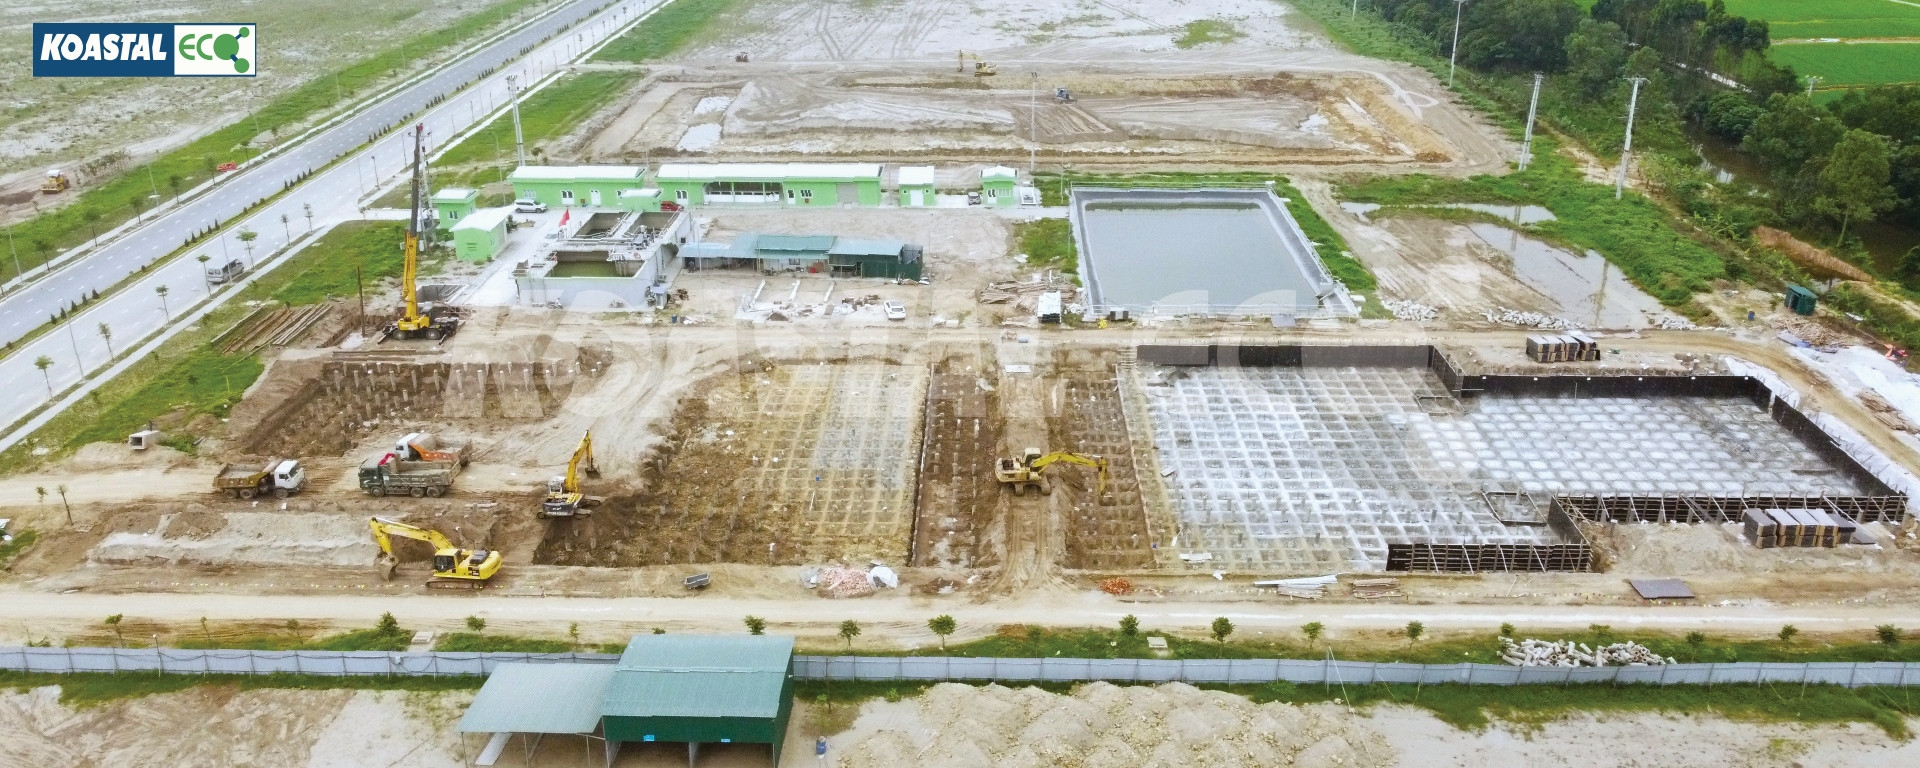 The centralized wastewater treatment plant of An Phat 1 Industrial Park